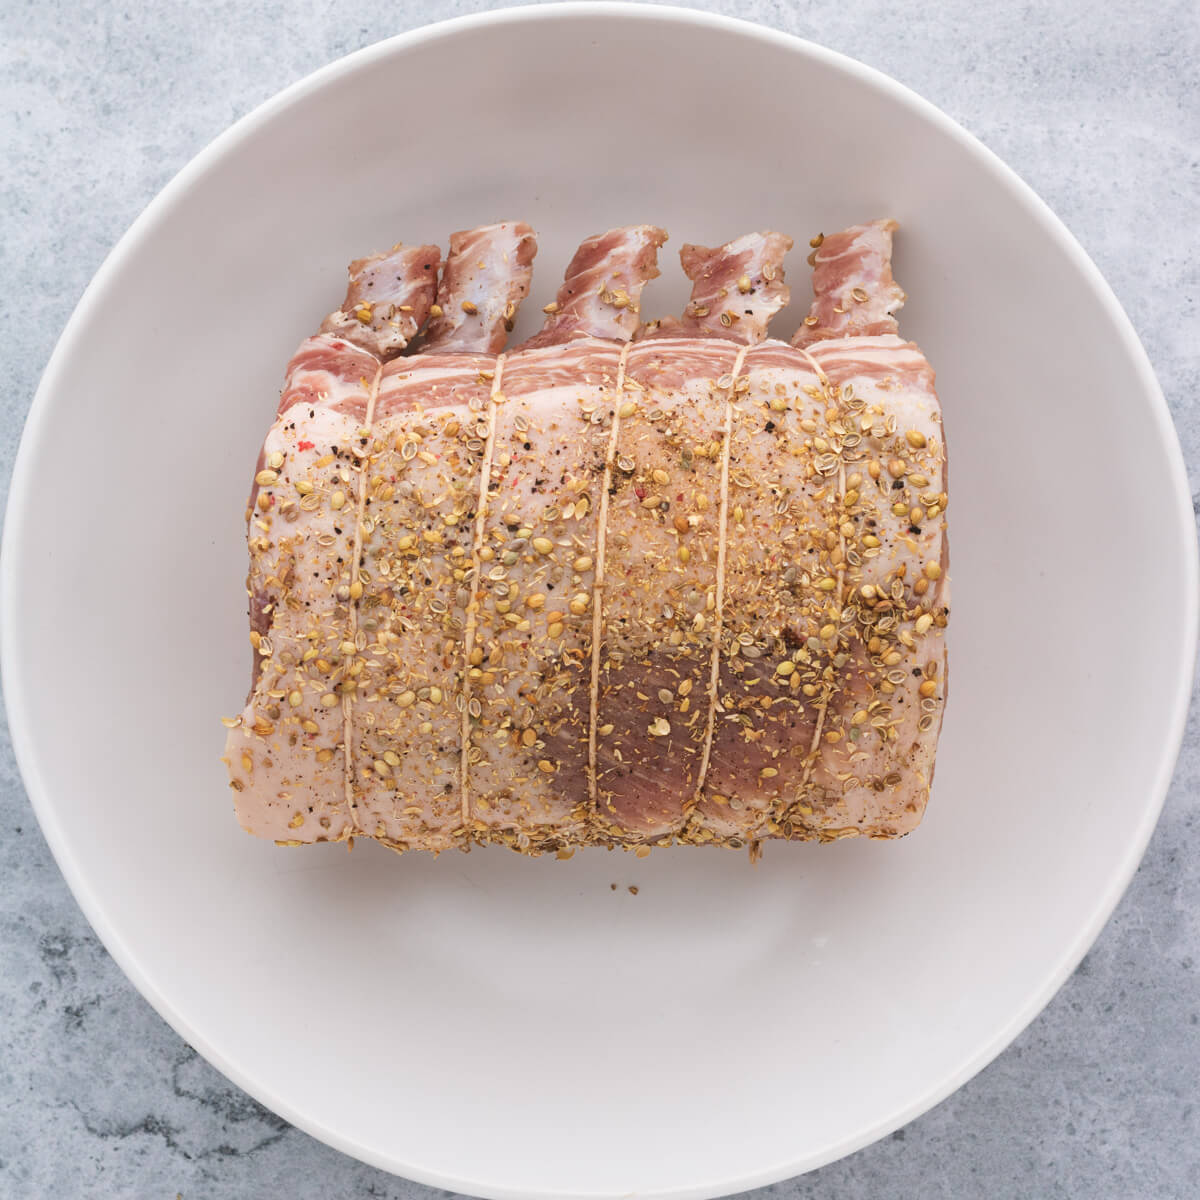 A raw pork rib roast coated with crushed coriander seeds in a white bowl.